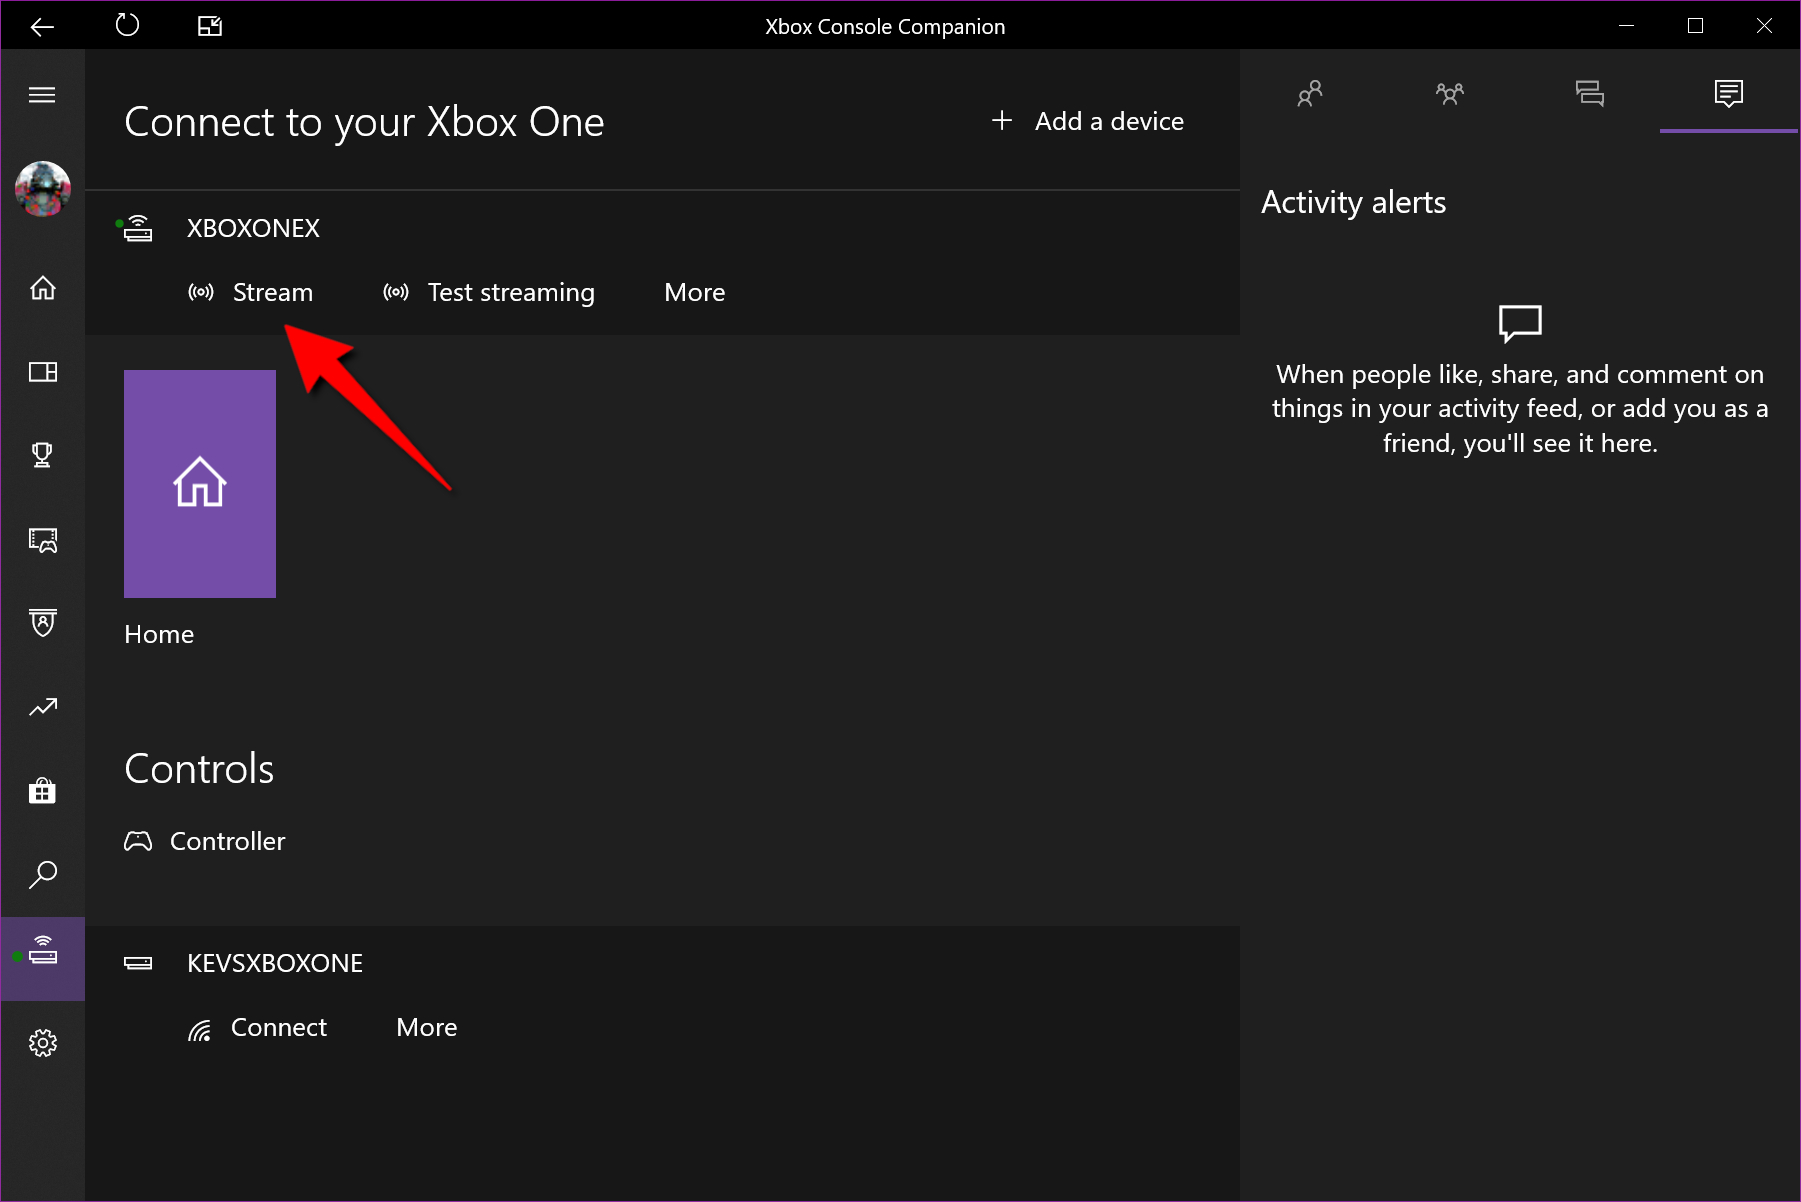 How to use Xbox Networking in Windows 10, to check your connection to Xbox  Live